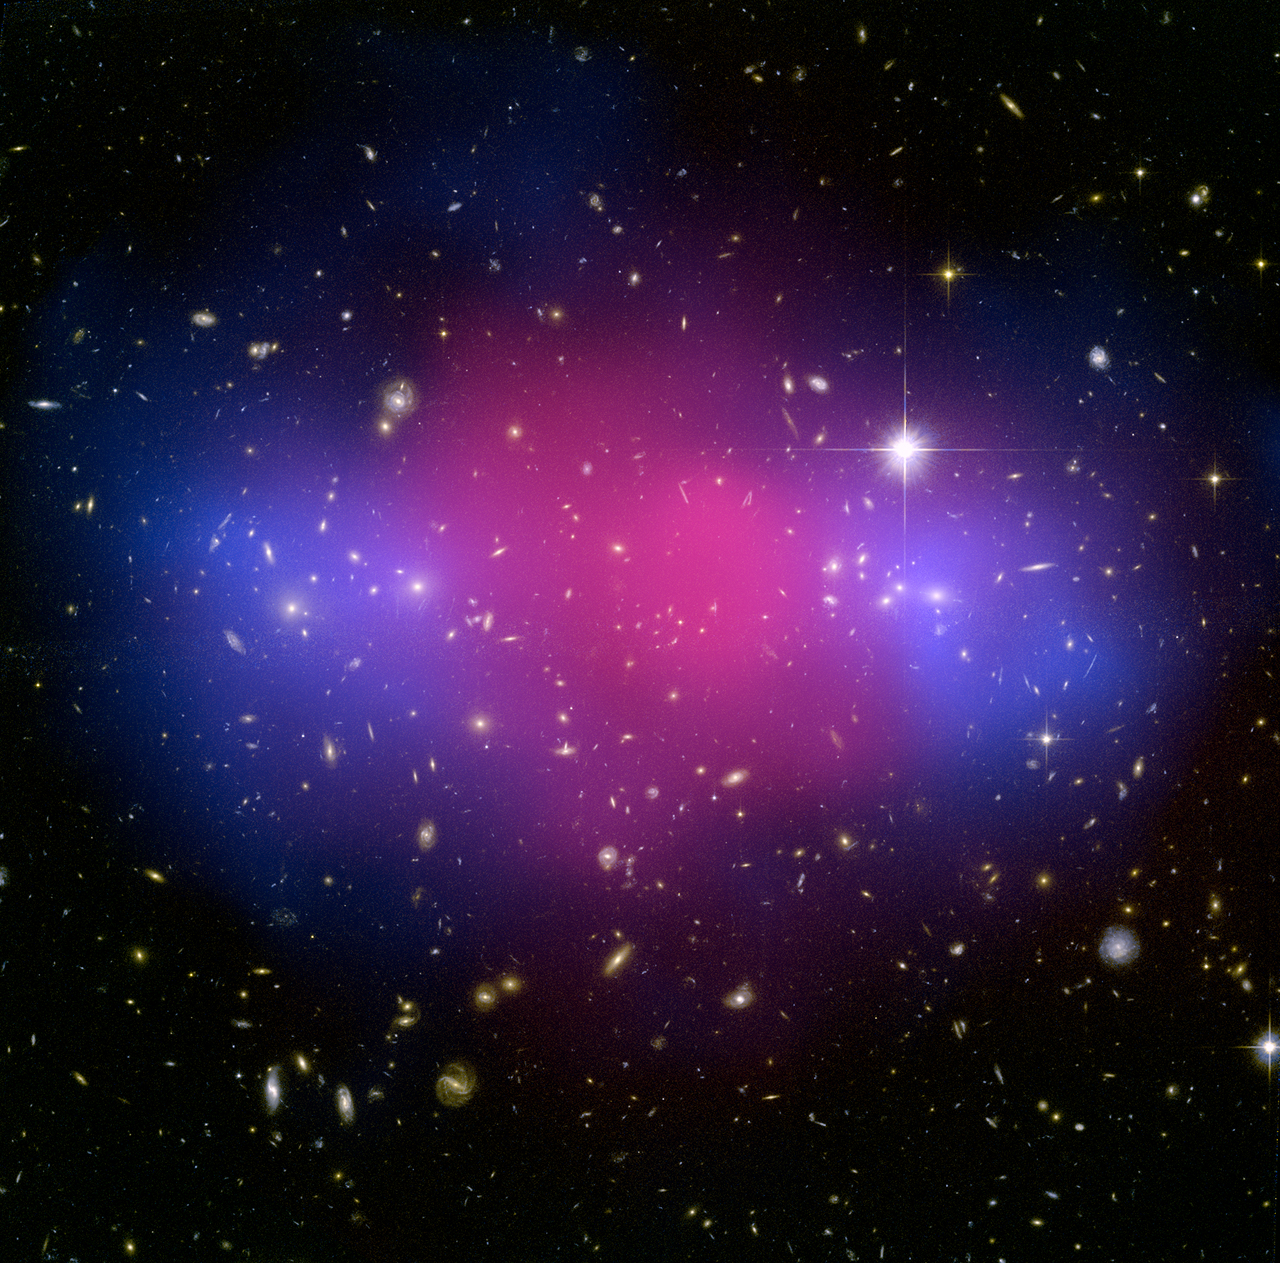 MACSJ0025: Two Giant Galaxy Clusters   
Collide